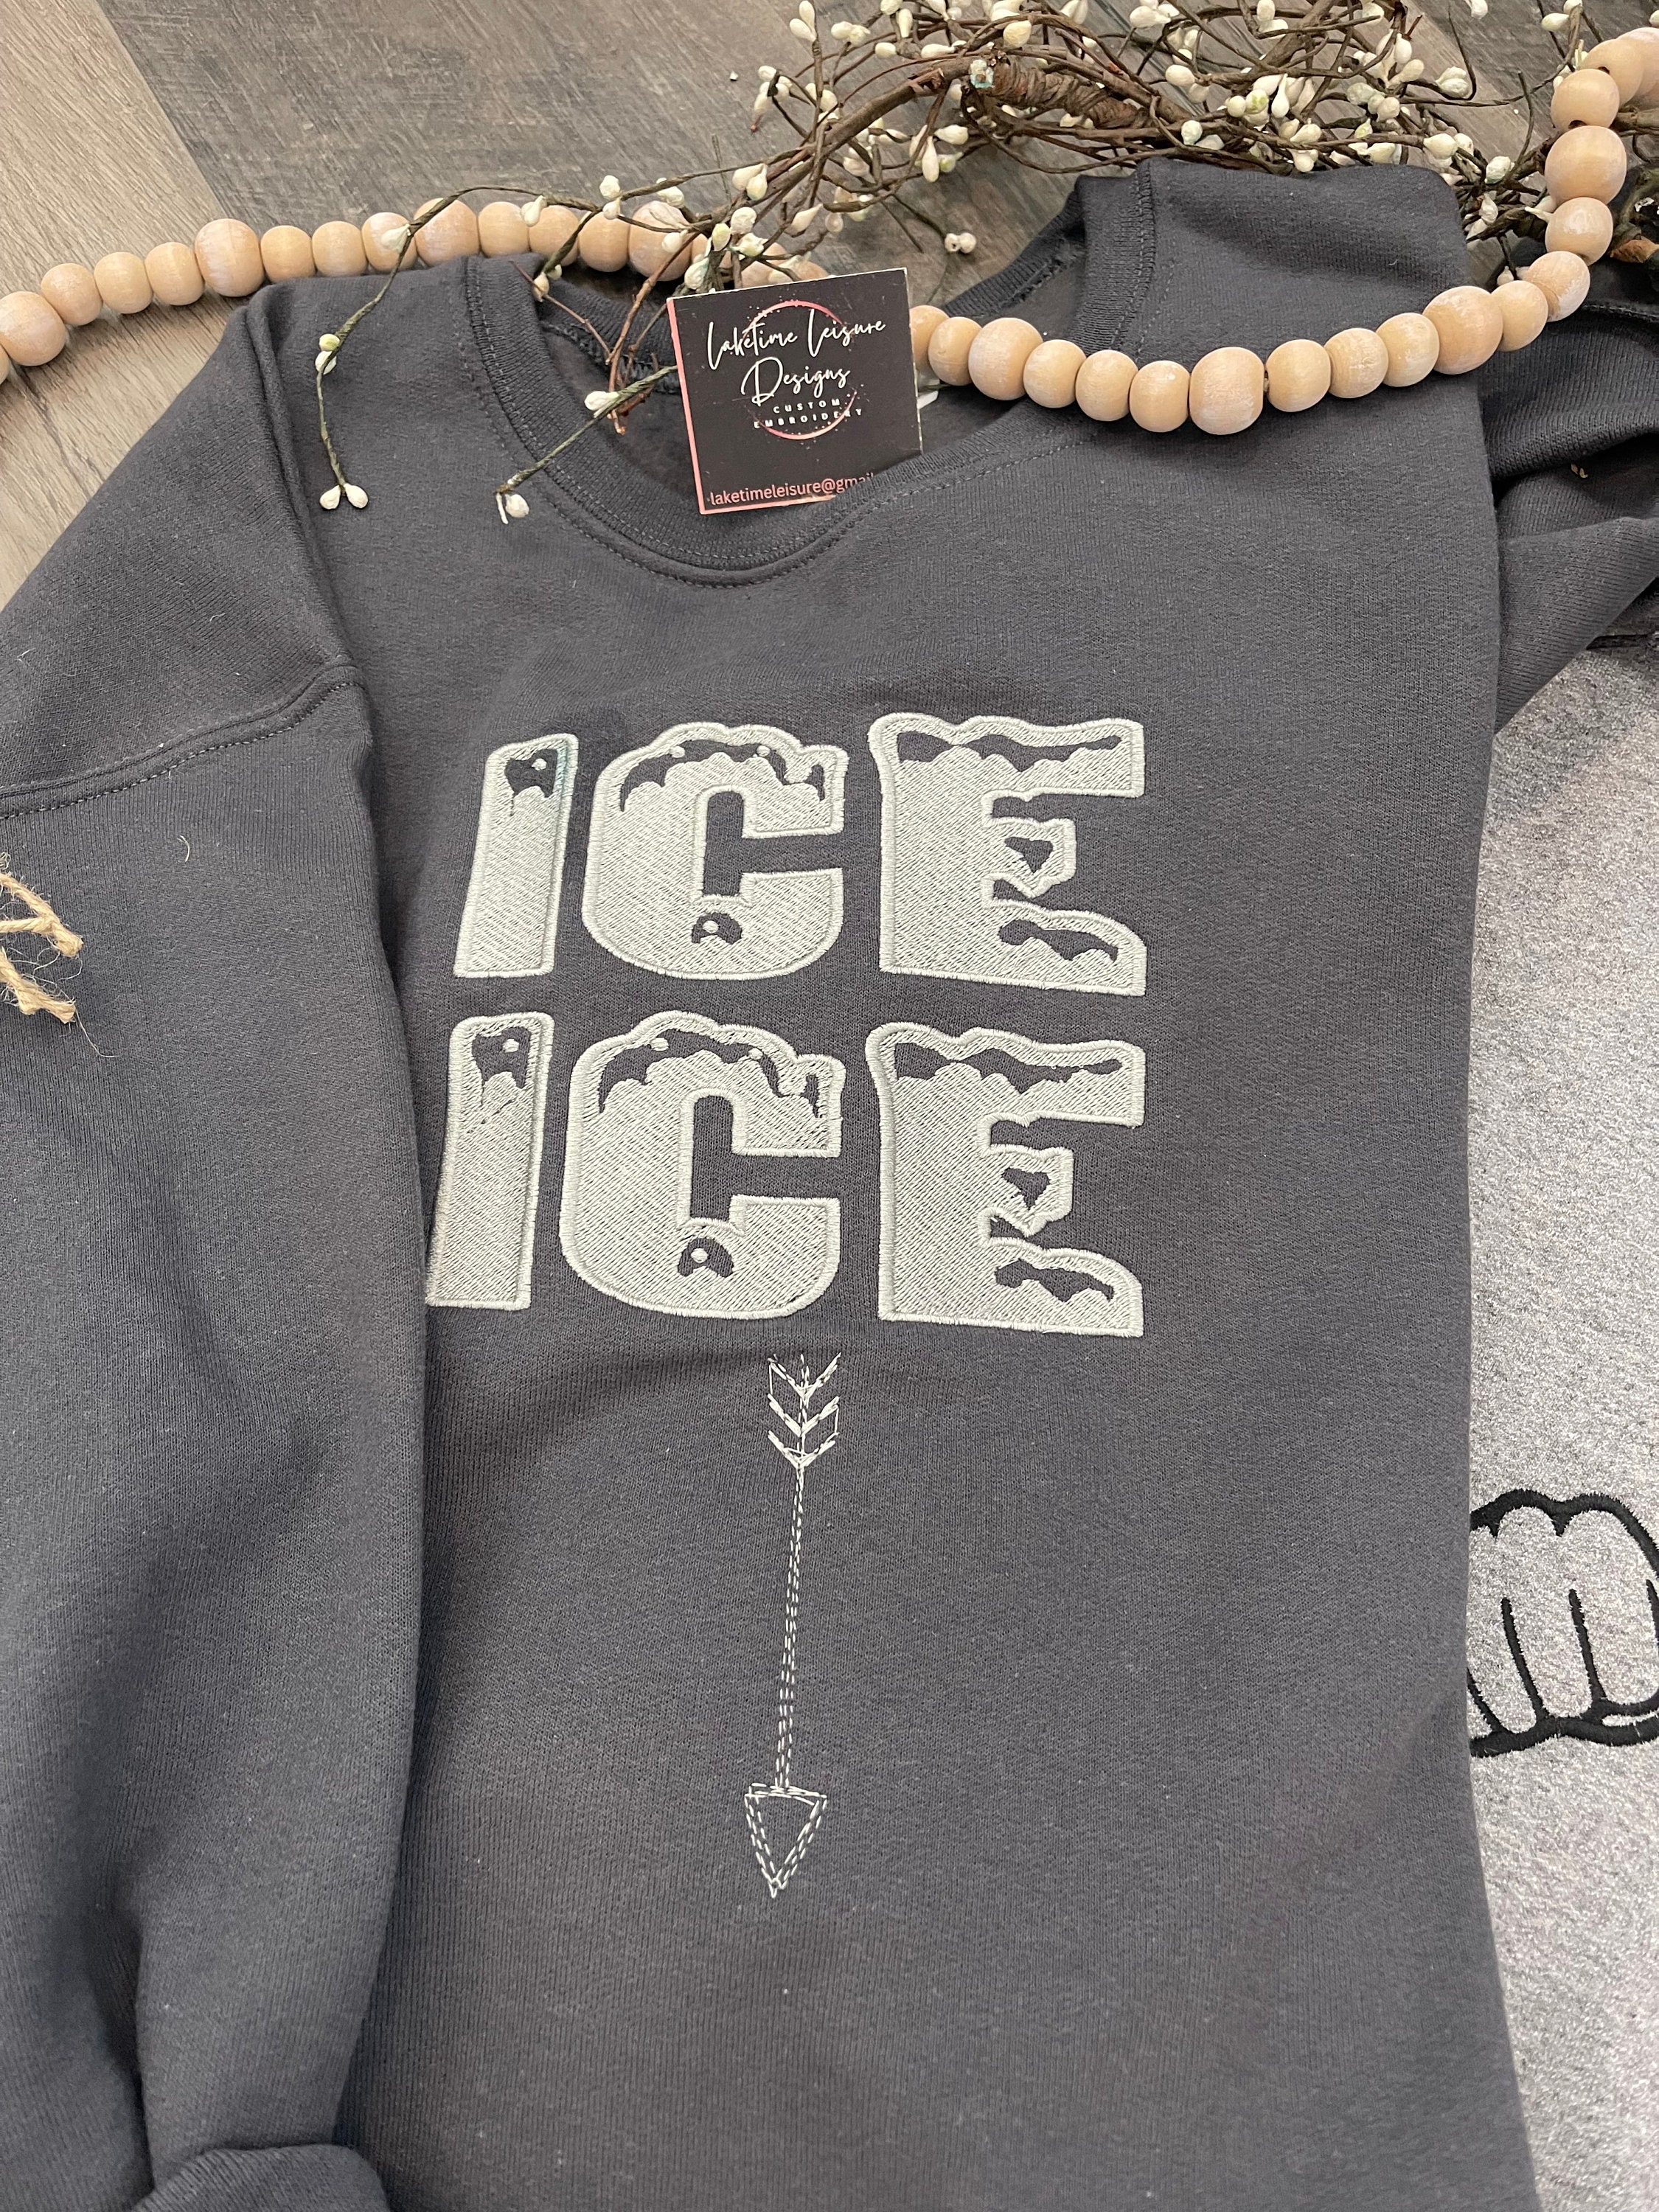 Discover ICE ICE Baby Man behind the bump embroidered hoodie, infant shirt. Custom embroidered